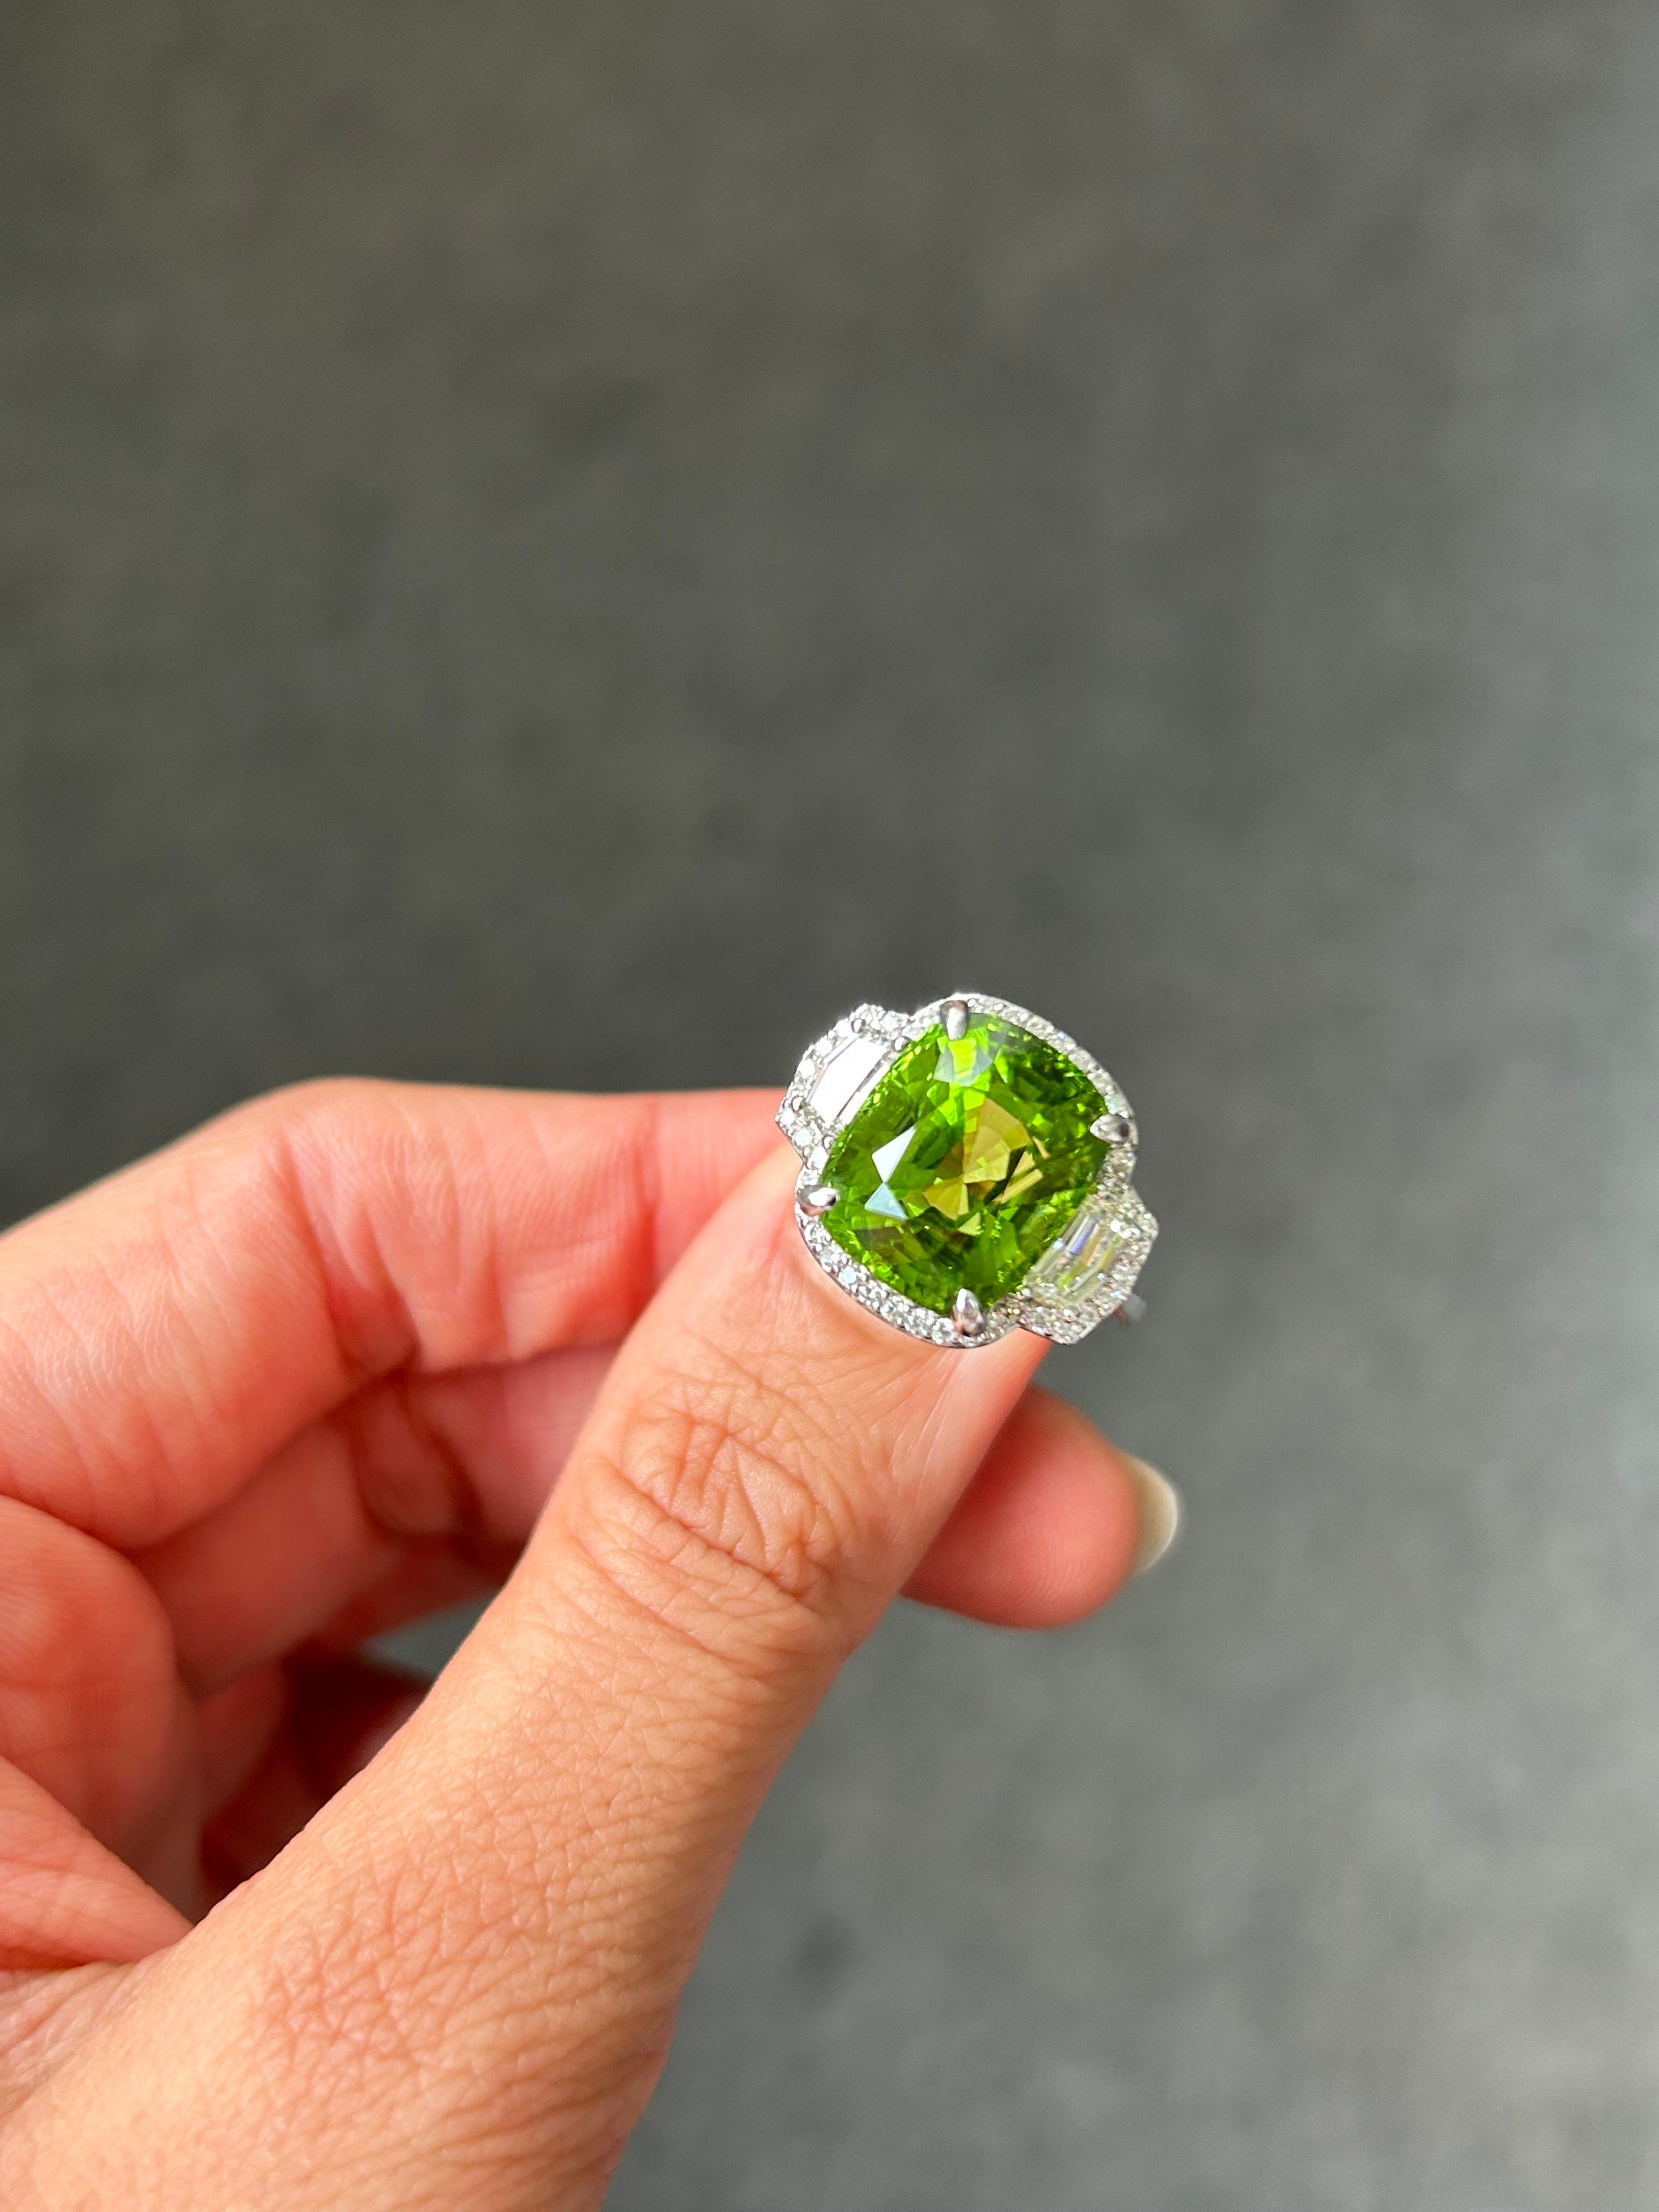 Top quality 11.96 carat Burmese Peridot with 0.61 carat Cadillac shaped side stone White Diamonds, and 0.34 carat Diamond halo. The center stone is an ideal green color, absolutely transparent with no inclusions and amazing luster/shine. The ring is